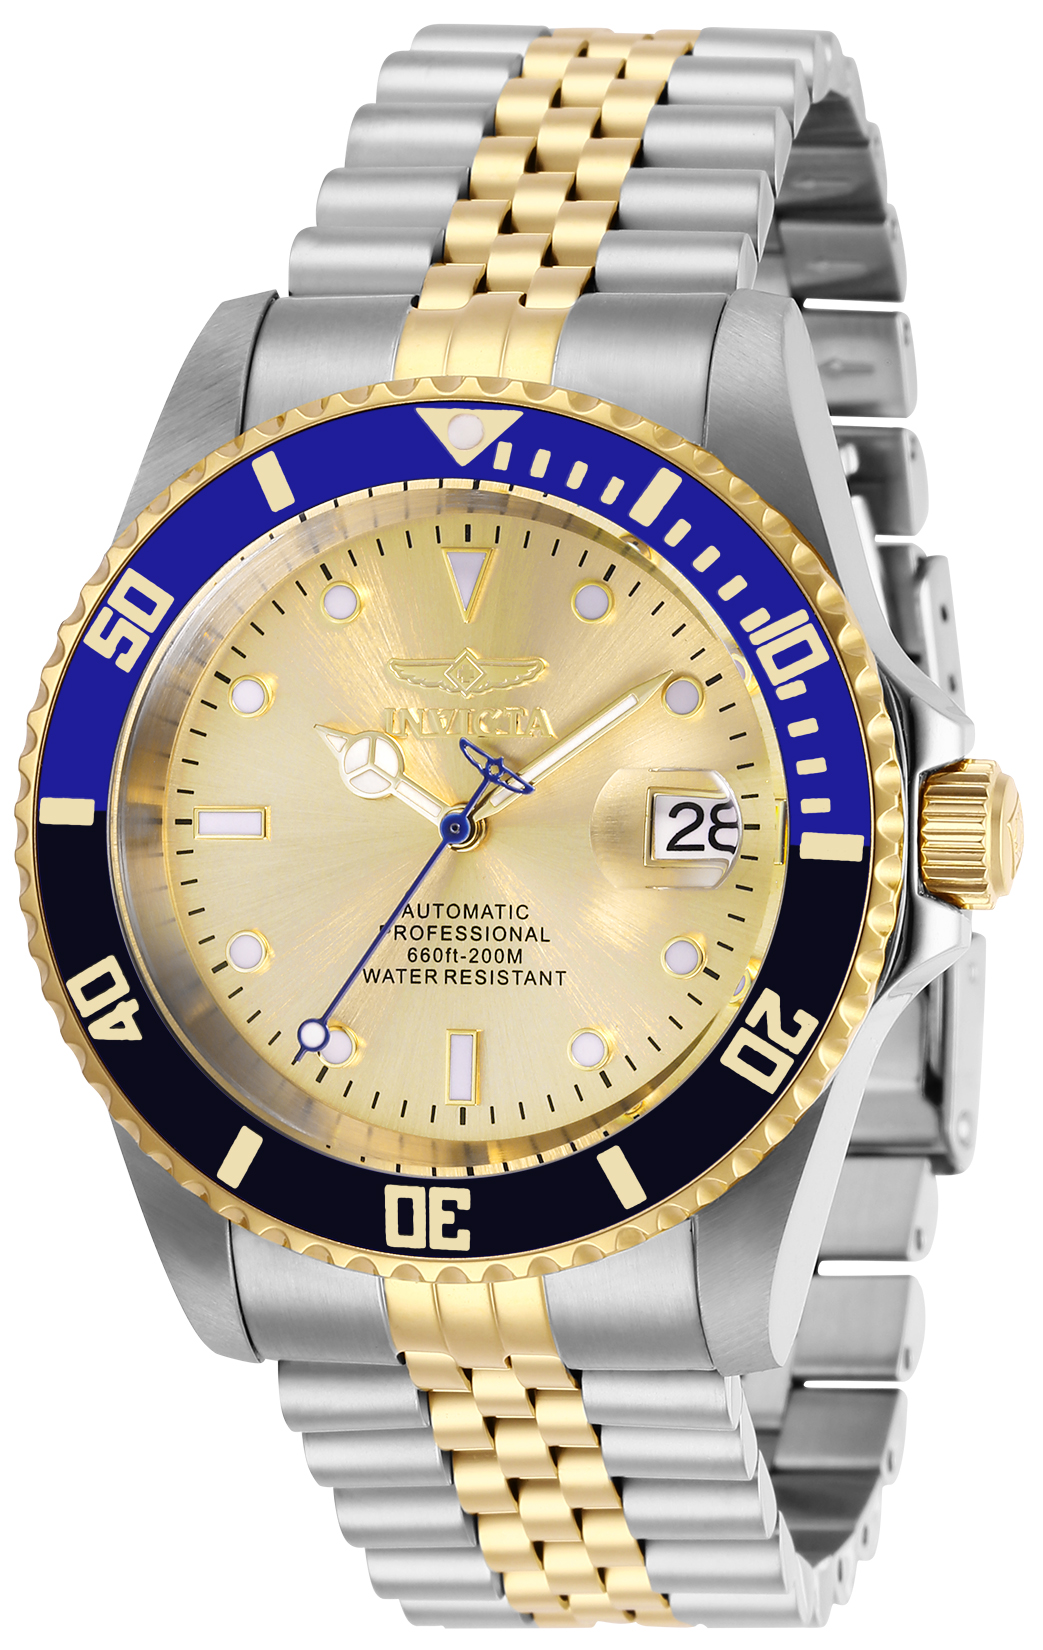 Shop Invicta Watches Watches on AccuWeather Shop